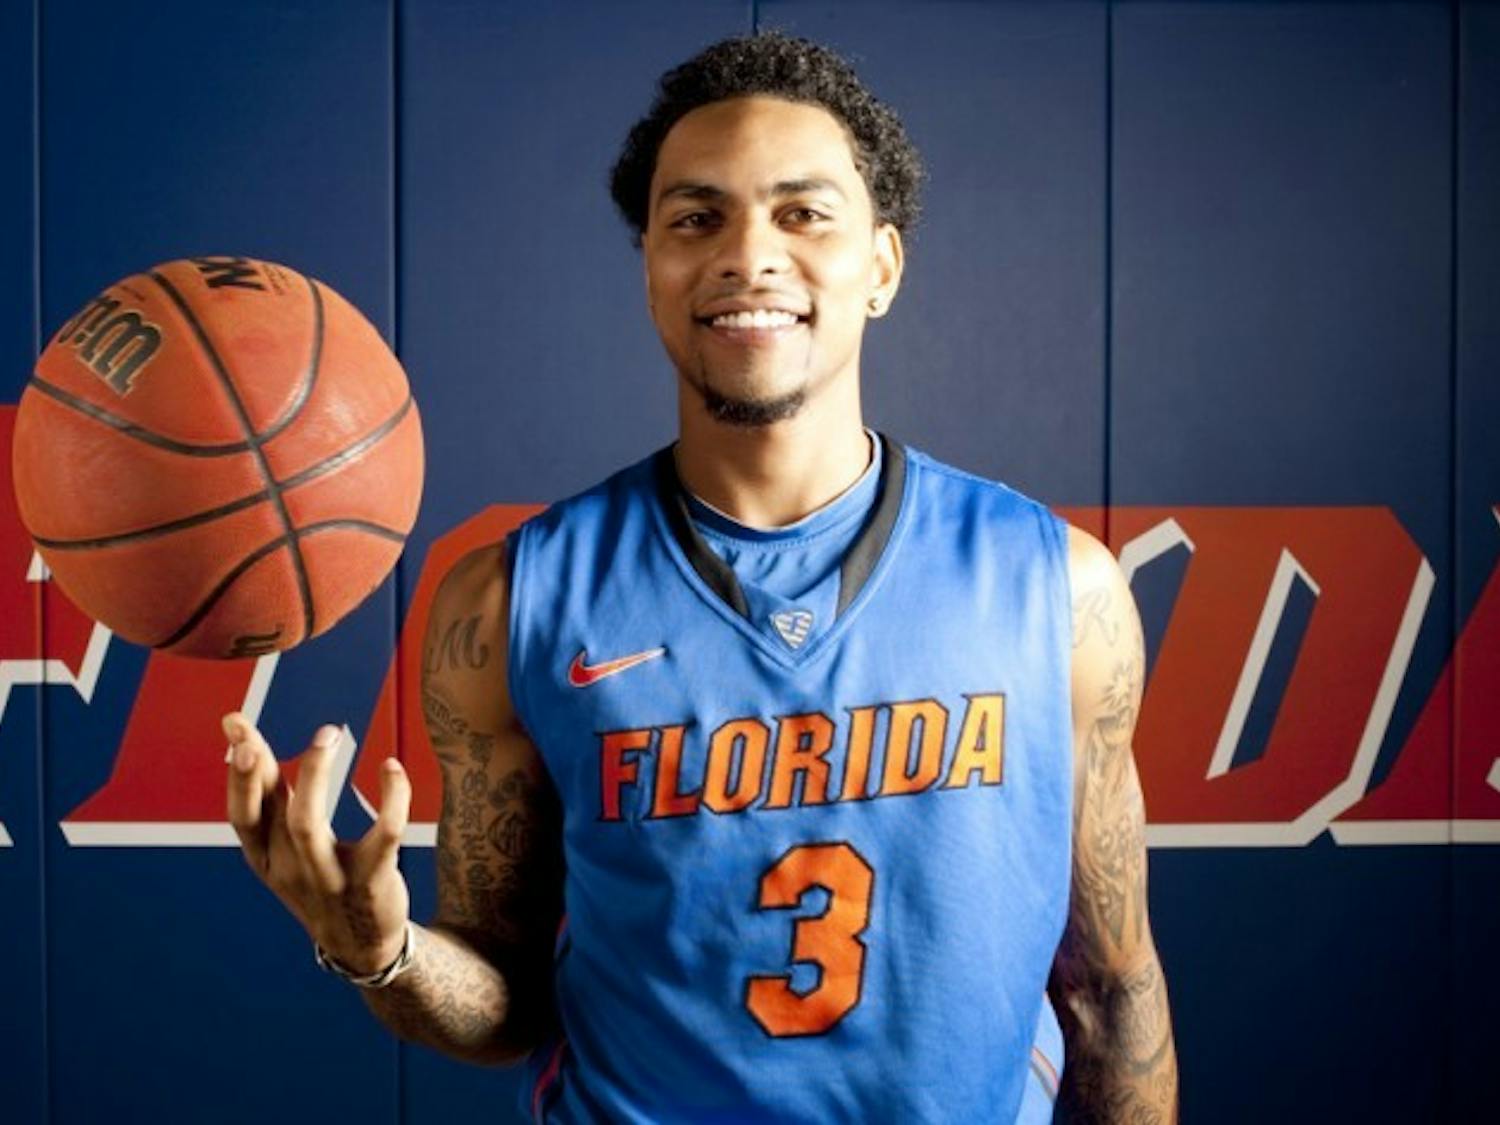 Redshirt senior guard Mike Rosario poses during Florida’s media day on Wednesday. Rosario struggled with injuries and inconsistency in 2011-12, averaging only 14.4 minutes per game.